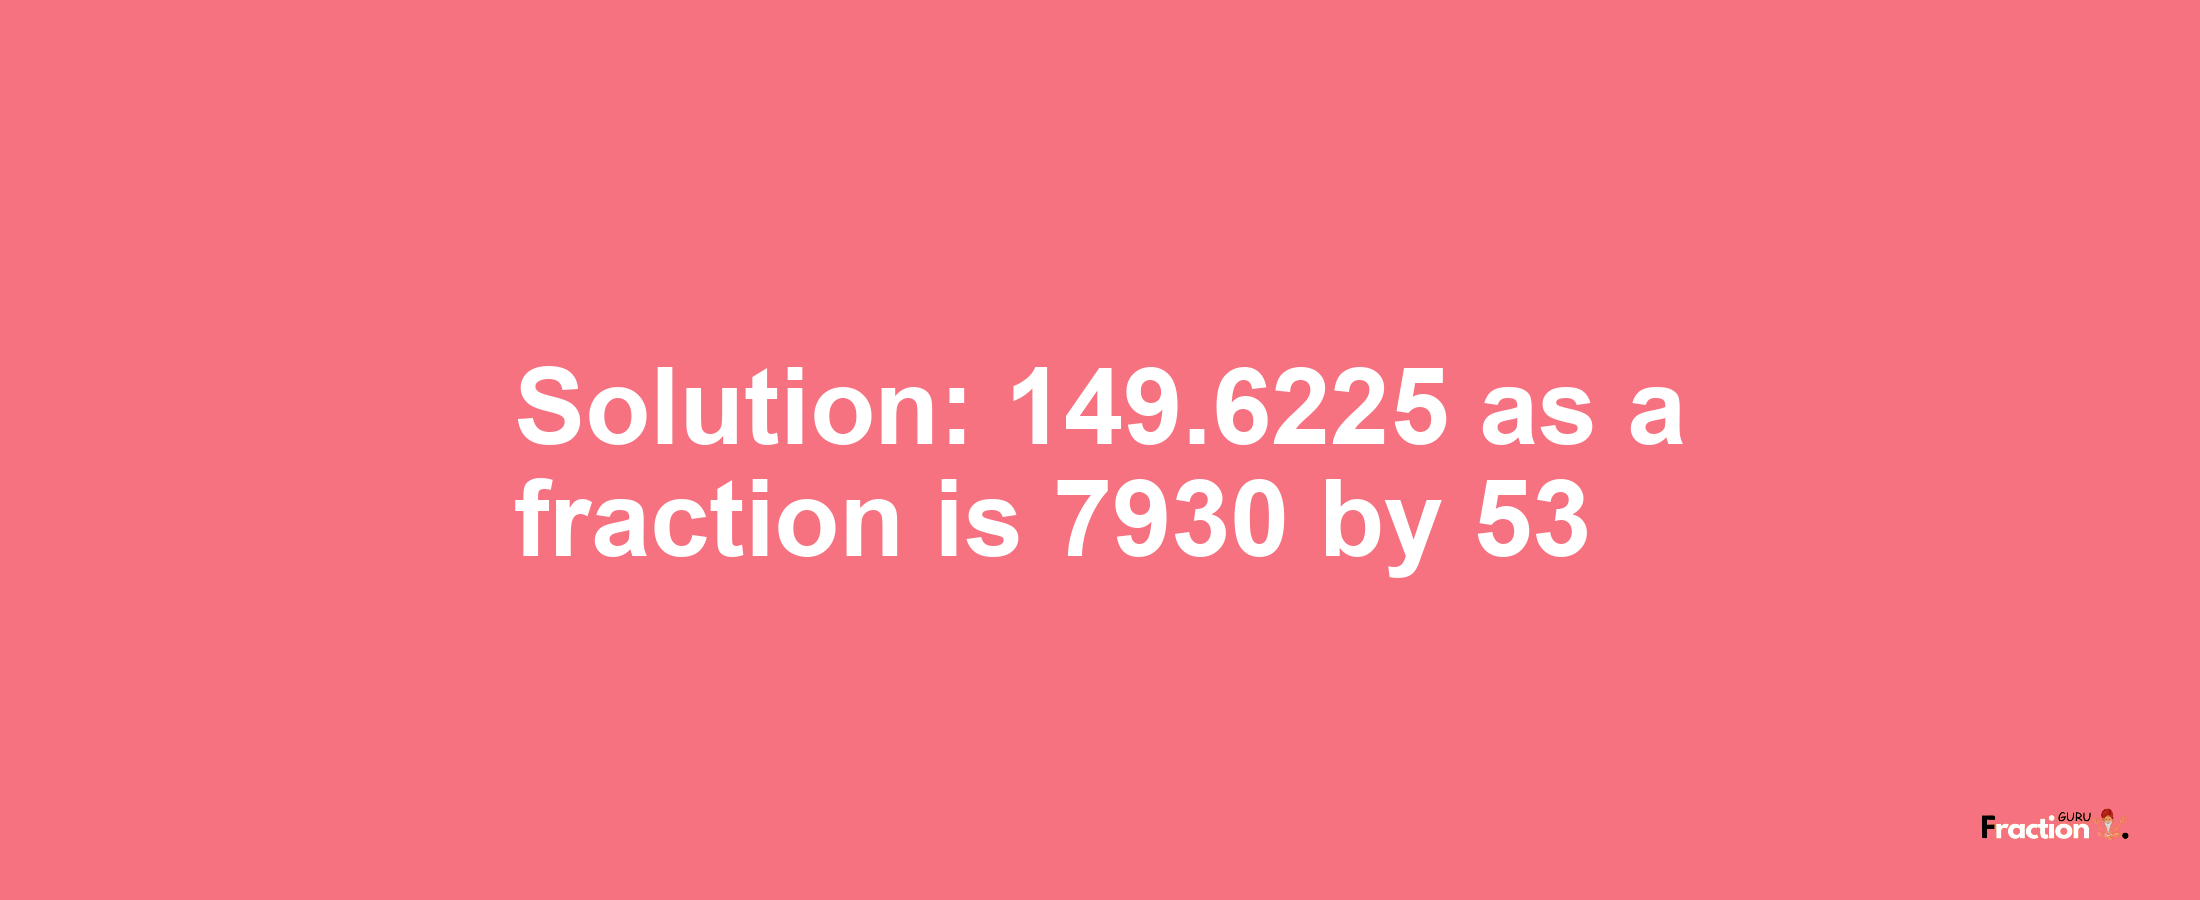 Solution:149.6225 as a fraction is 7930/53